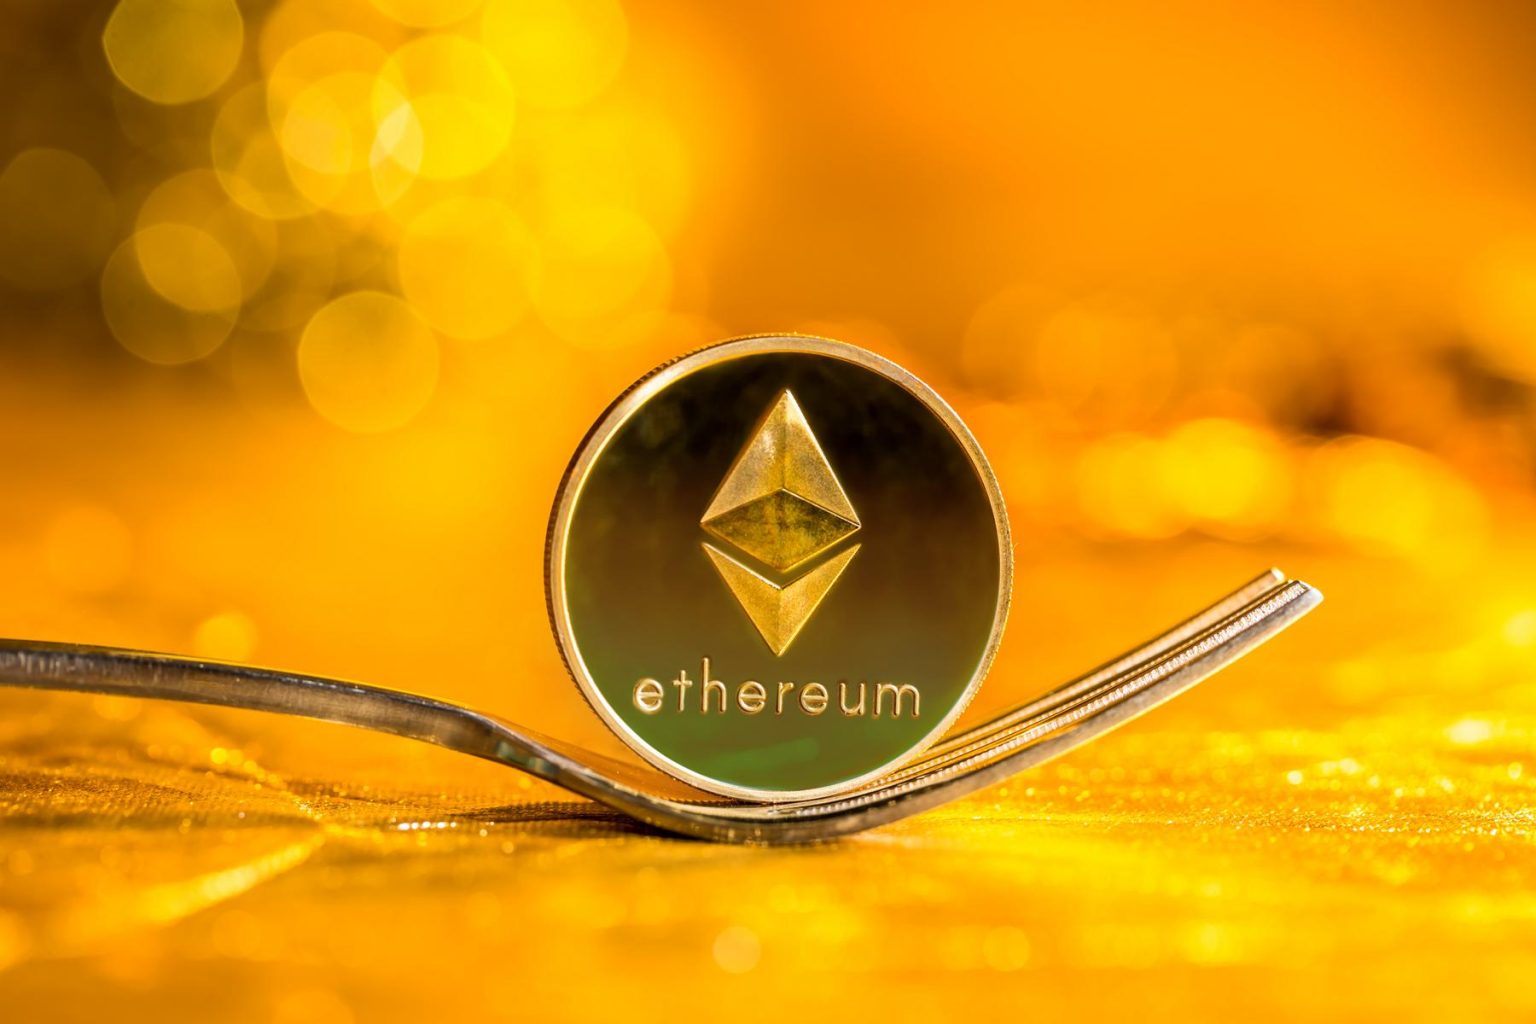 Ethereum-ETH-coin-held-by-fork-with-golden-background